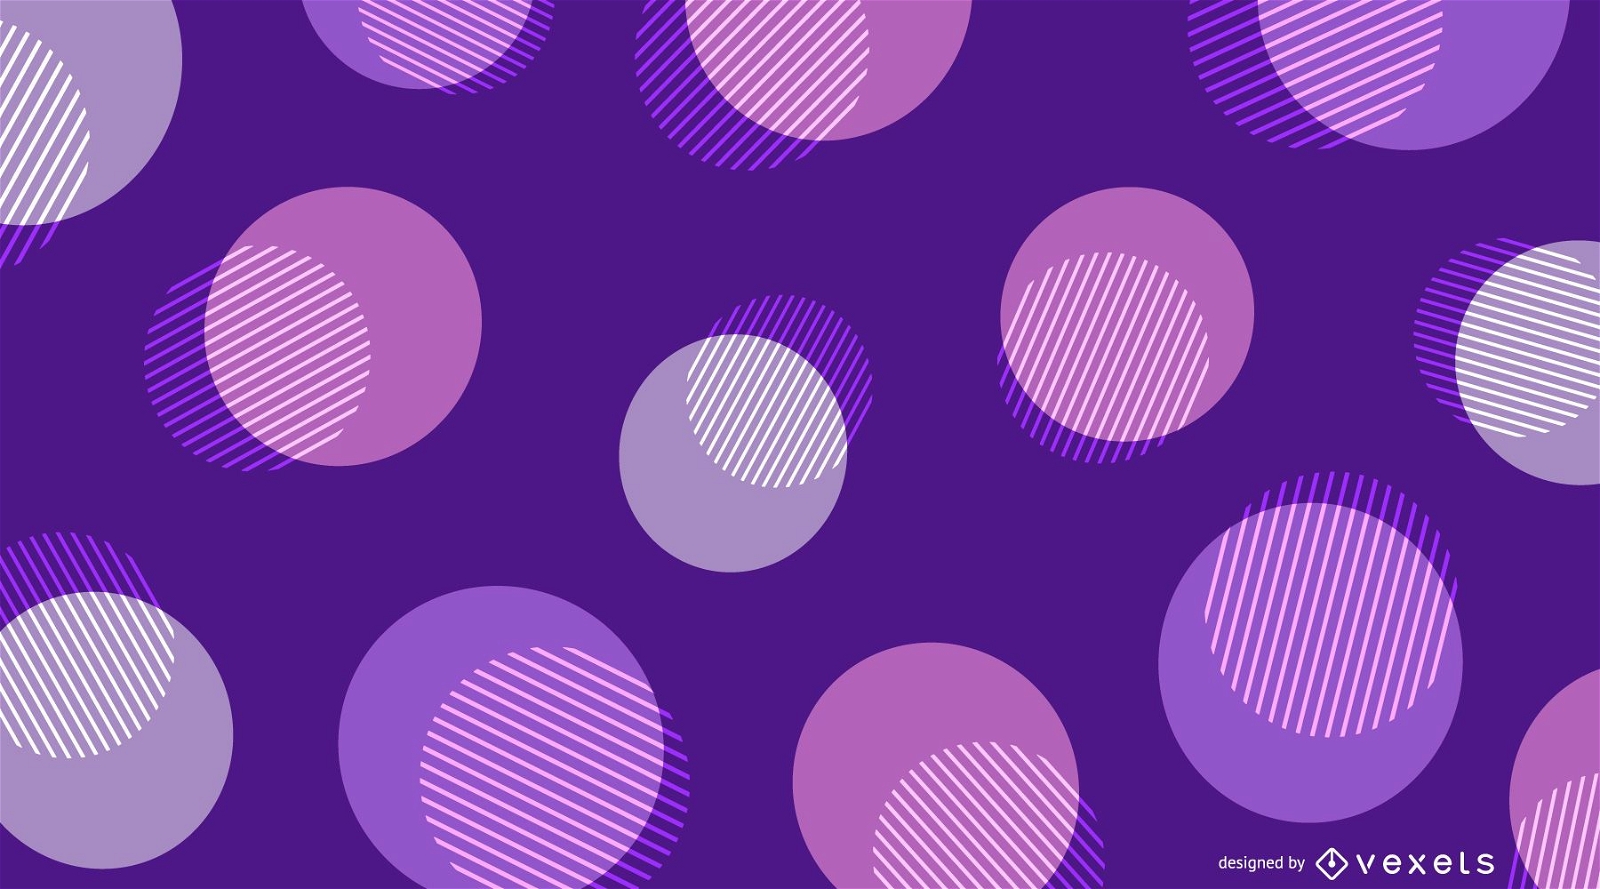 Circle shapes in purple background design